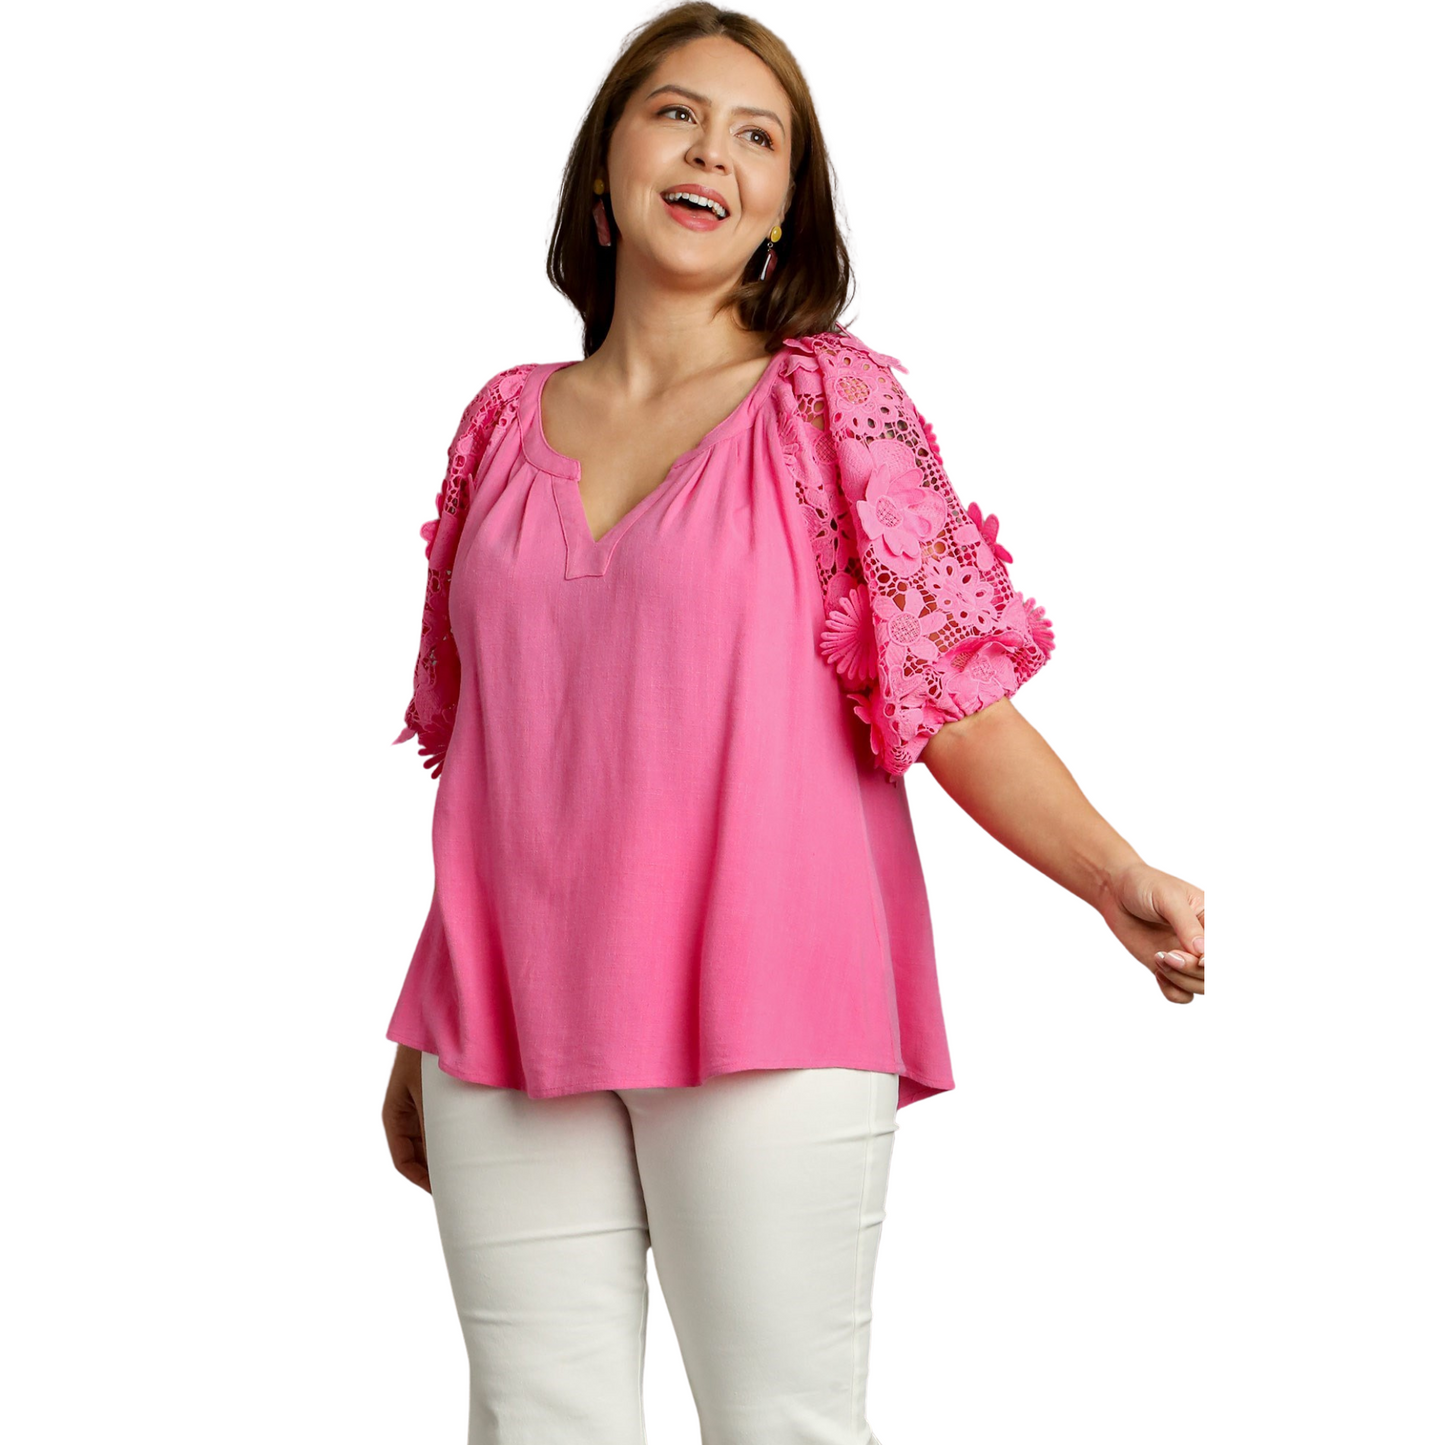 This Boxy Cut Top is a must-have for any fashion-forward plus size woman. The bubble sleeves and 3D flower print add a unique and trendy touch, while the bright pink color makes a bold statement. With a comfortable and flattering fit, this top is the perfect addition to your wardrobe.